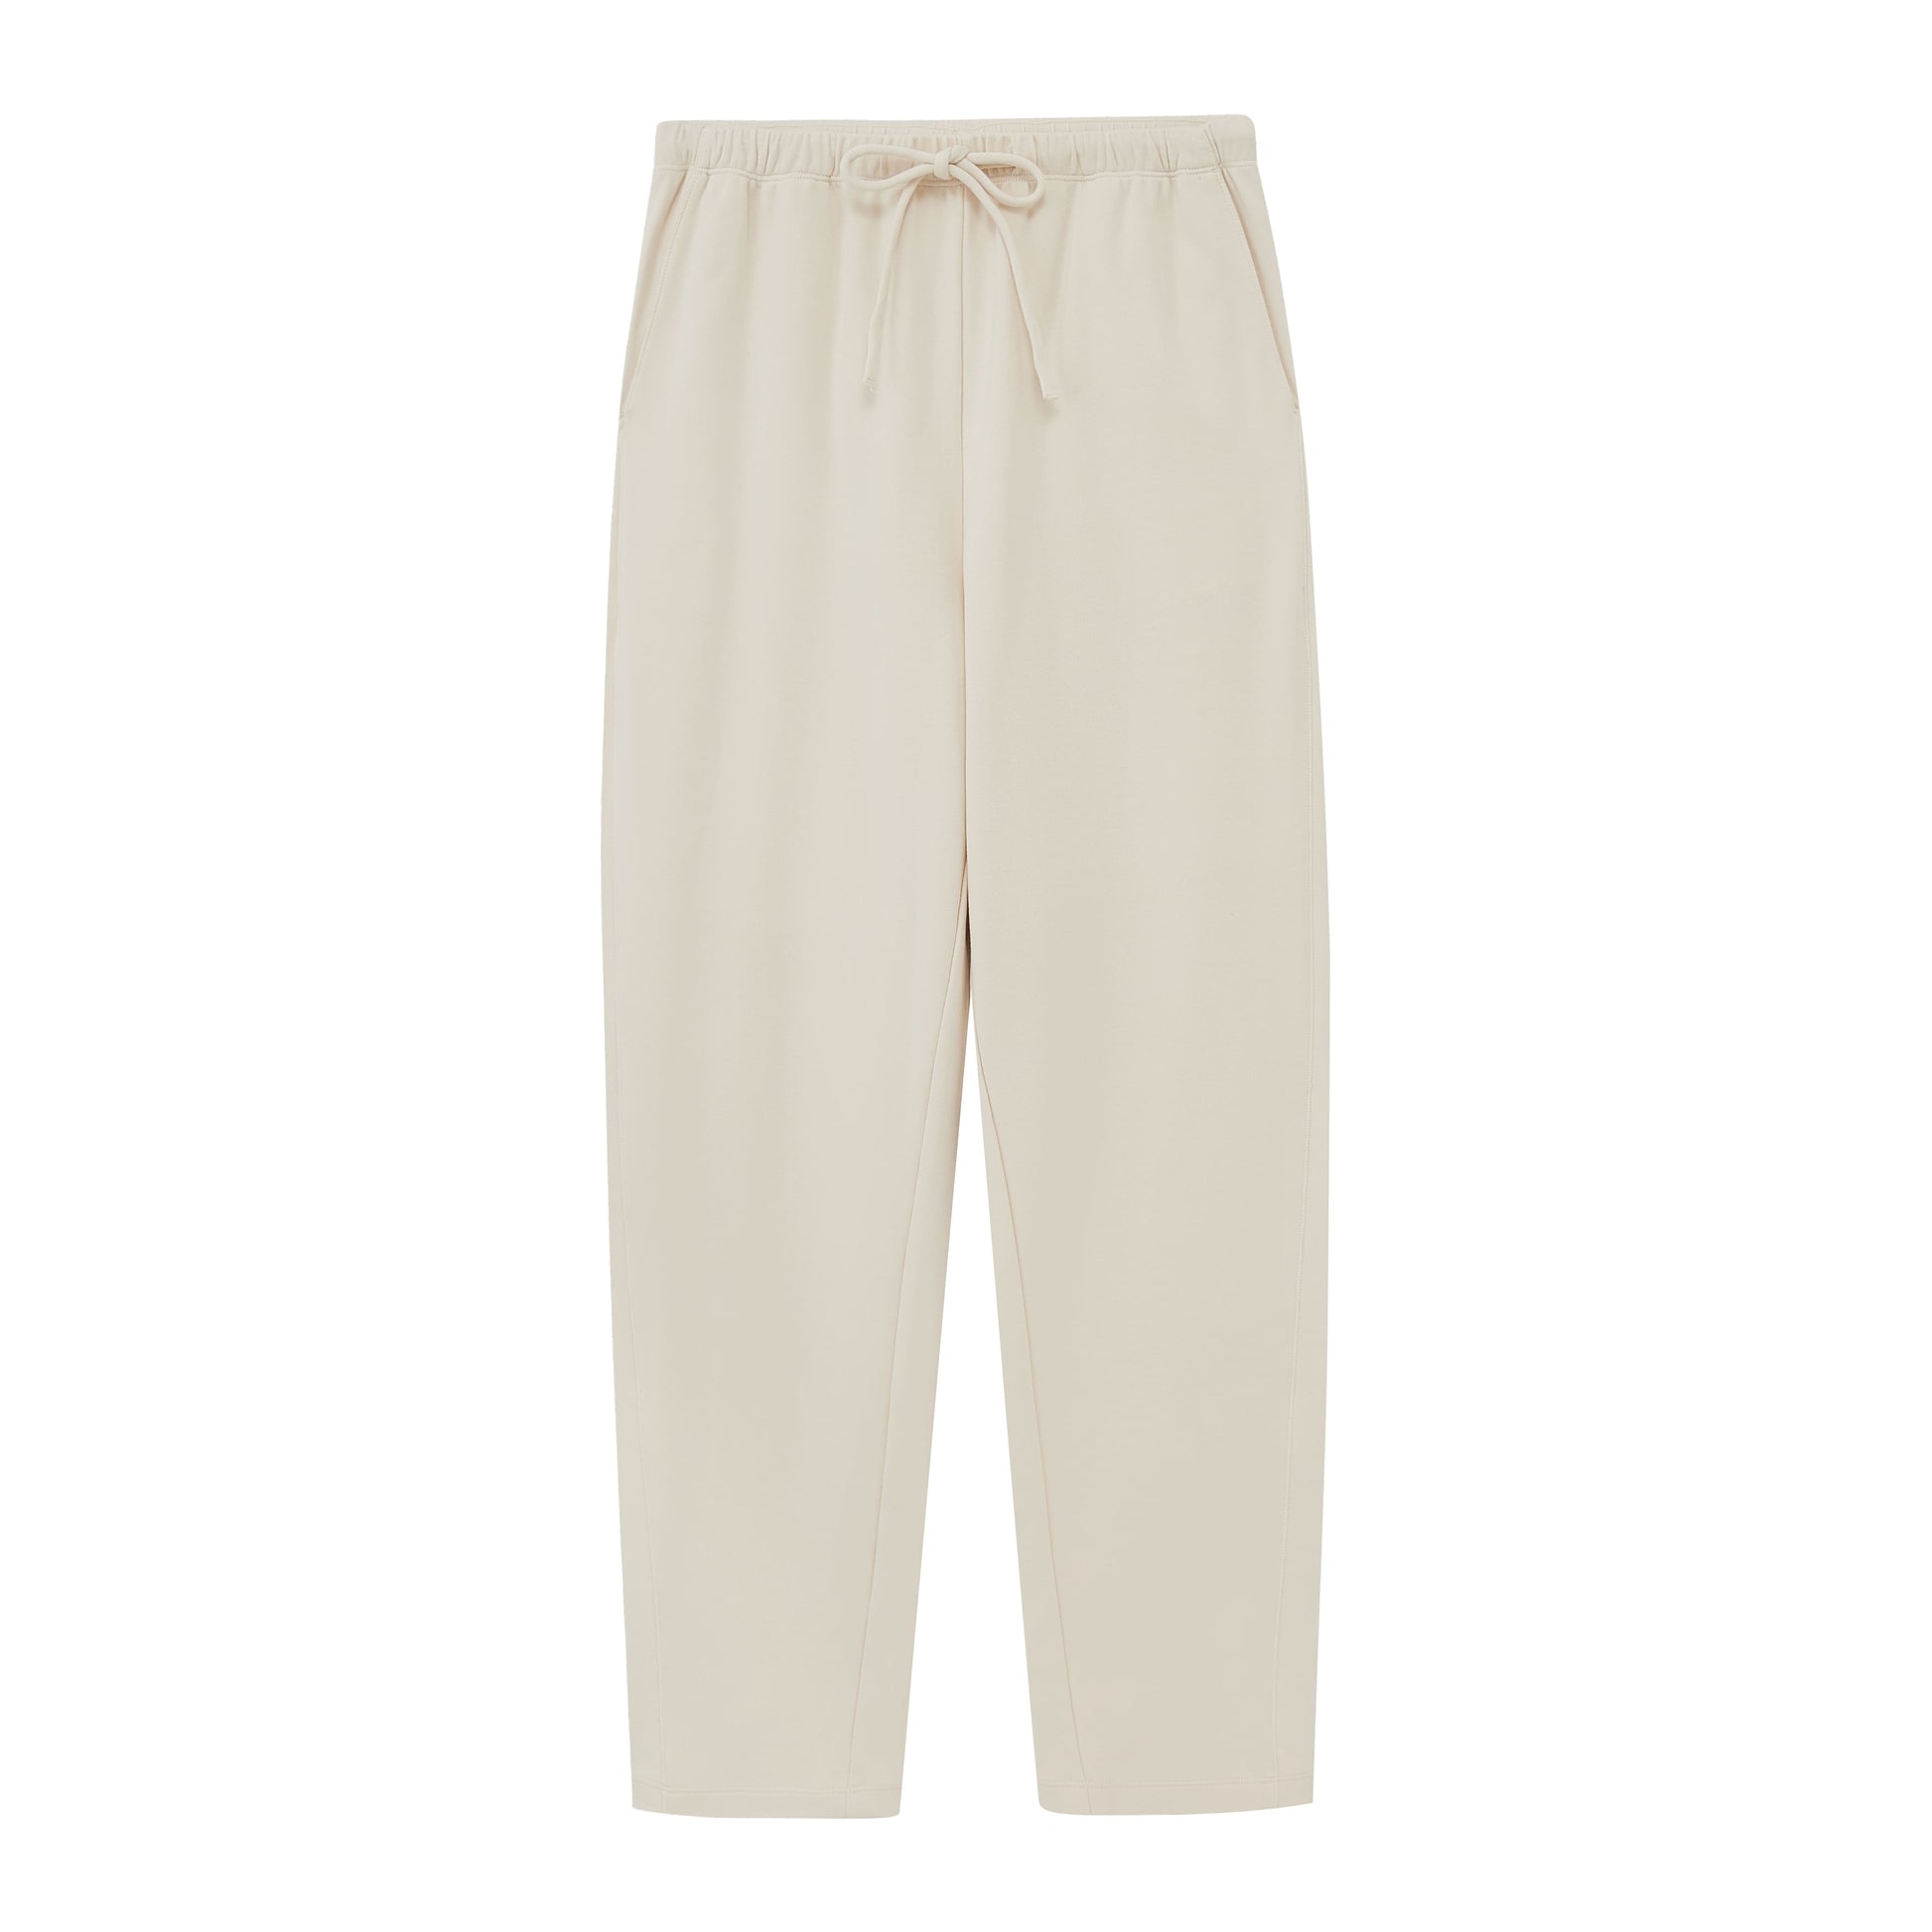 a pair of cream color pants 